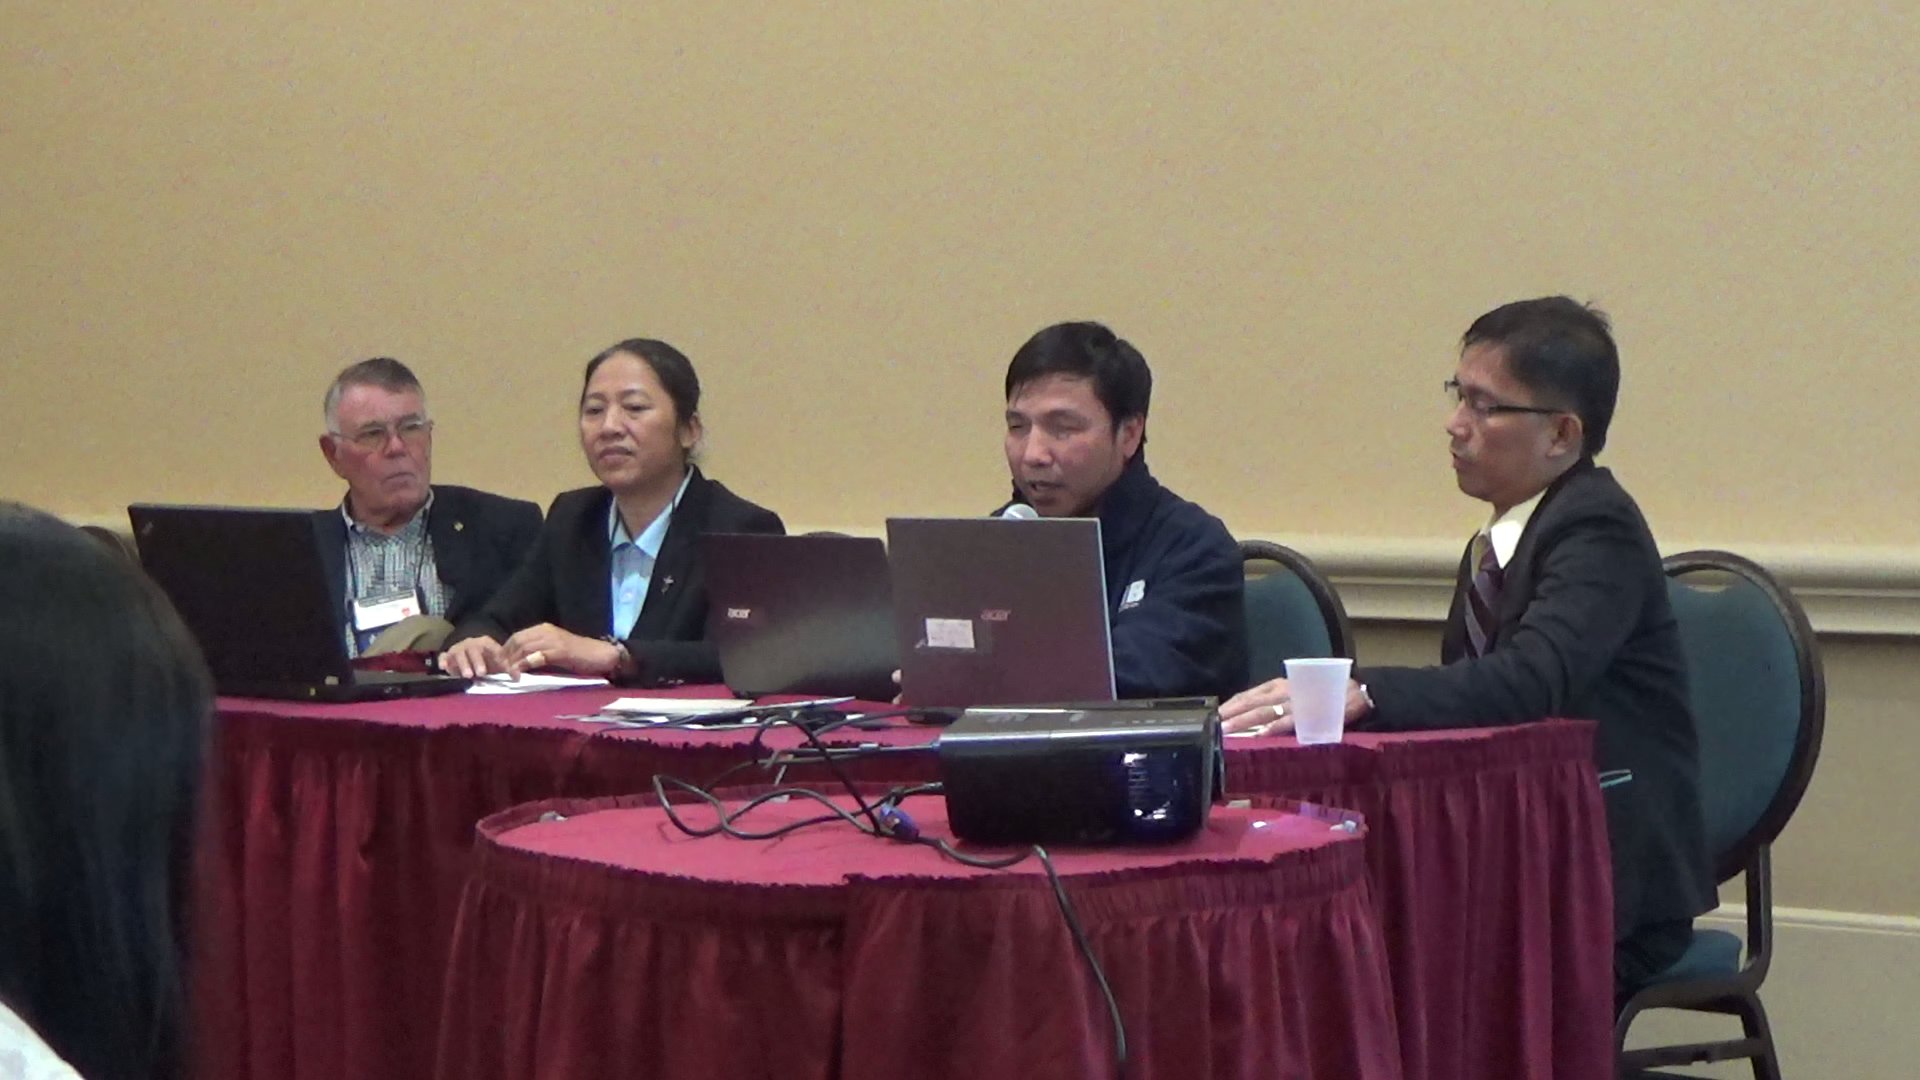 Phuc making presentation with the group of other country coordinators in Orlando